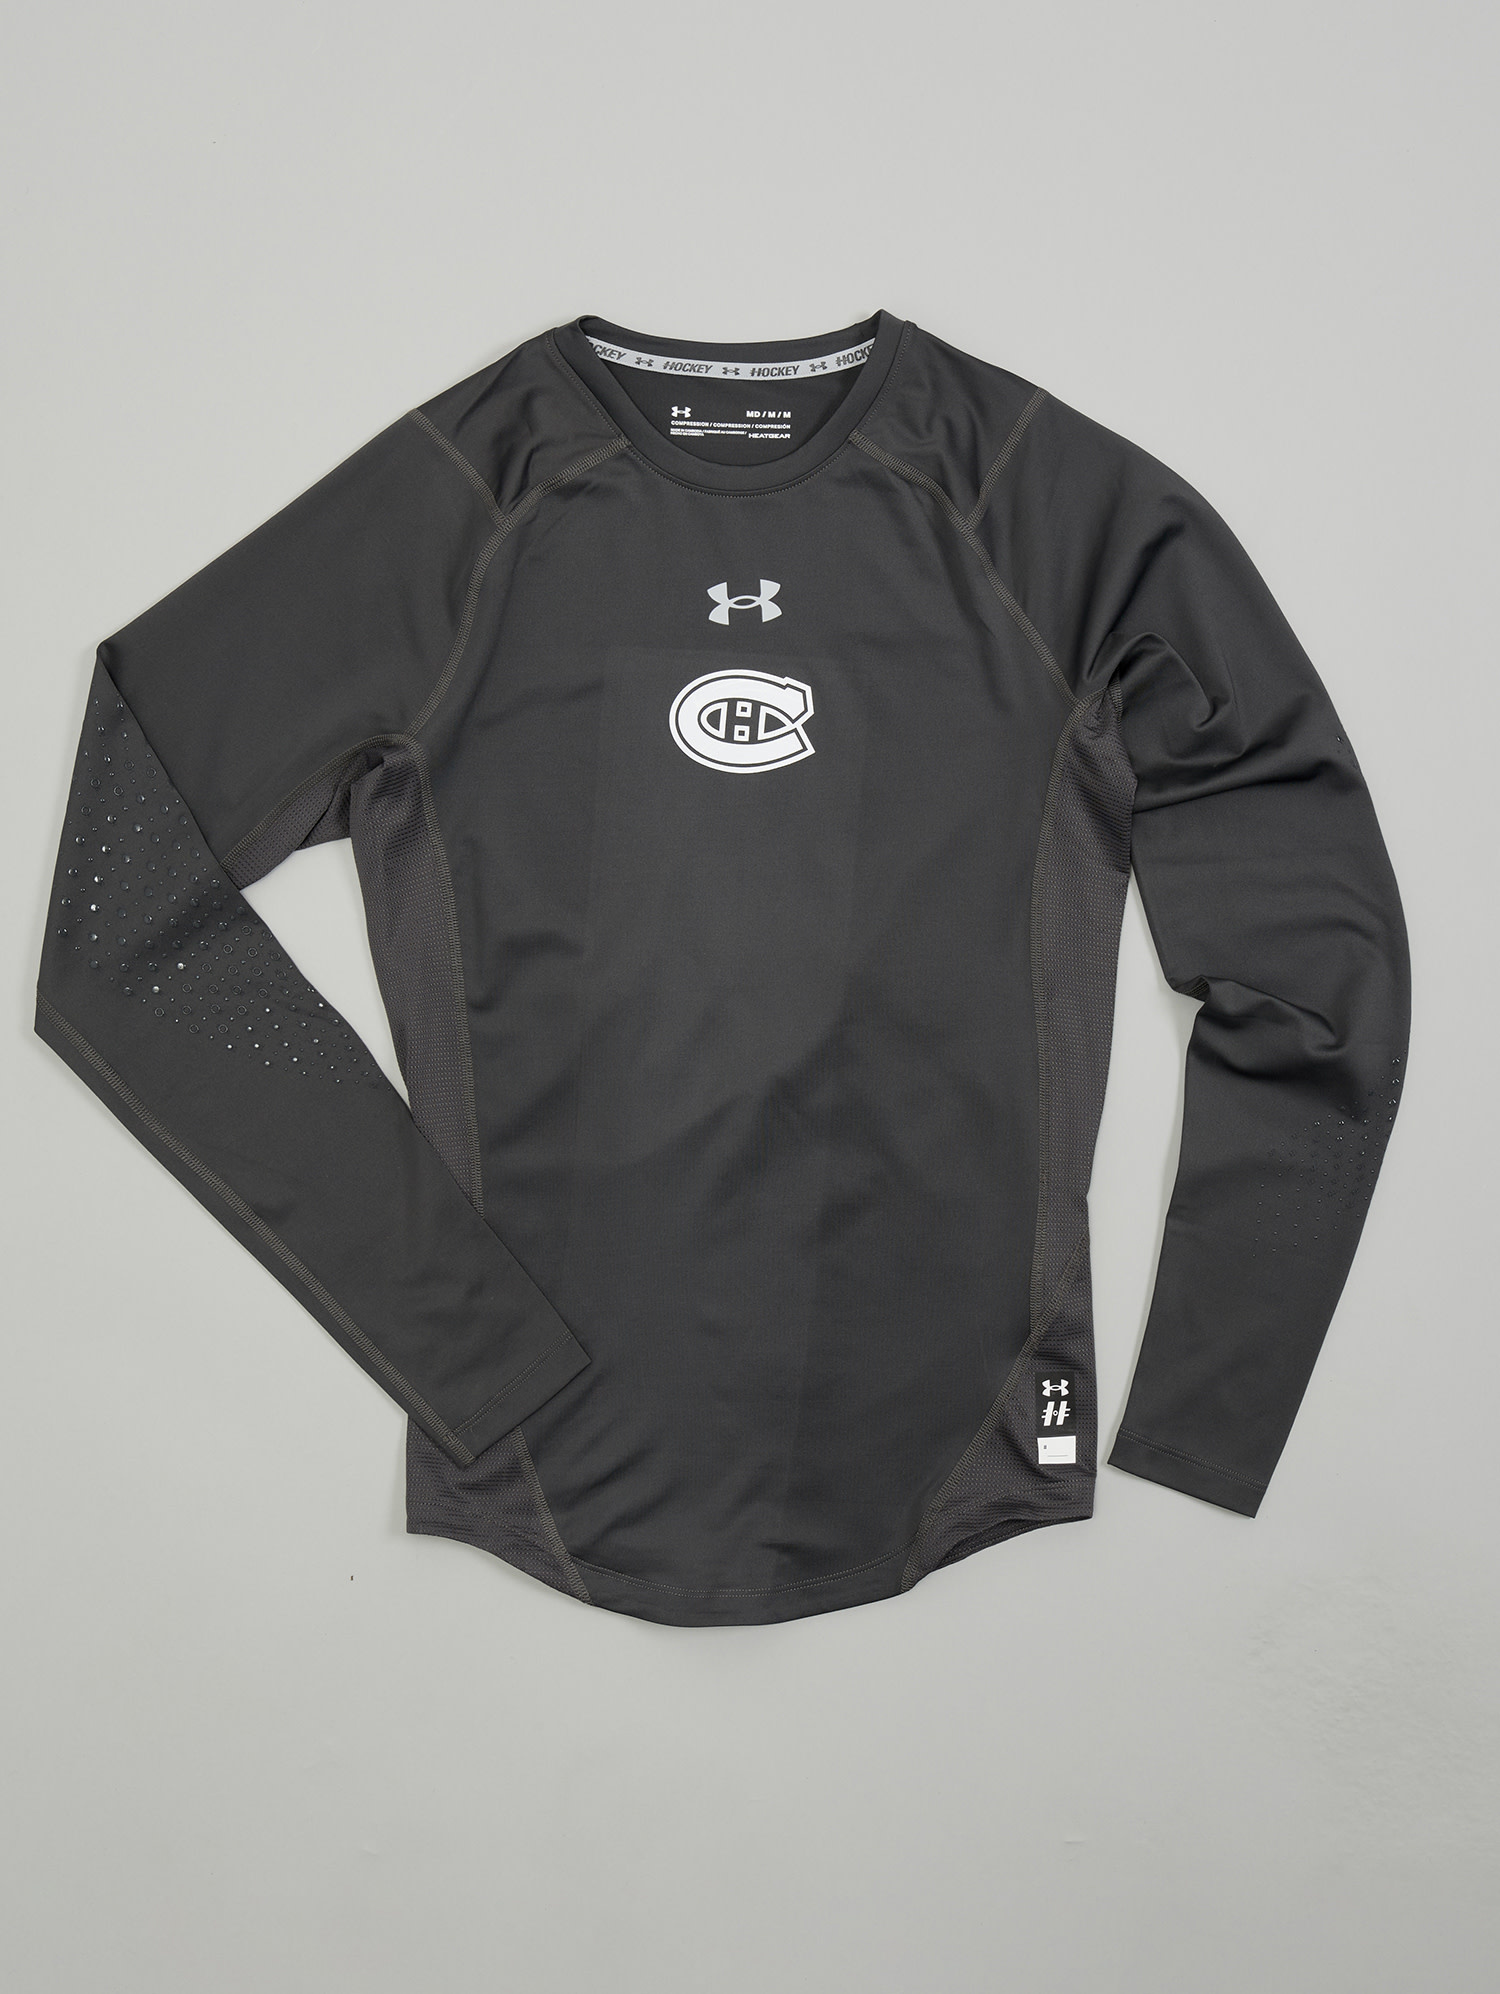 https://cdn.shoplightspeed.com/shops/608428/files/55071861/under-armour-ua-fitted-grippy-montreal-canadiens-l.jpg